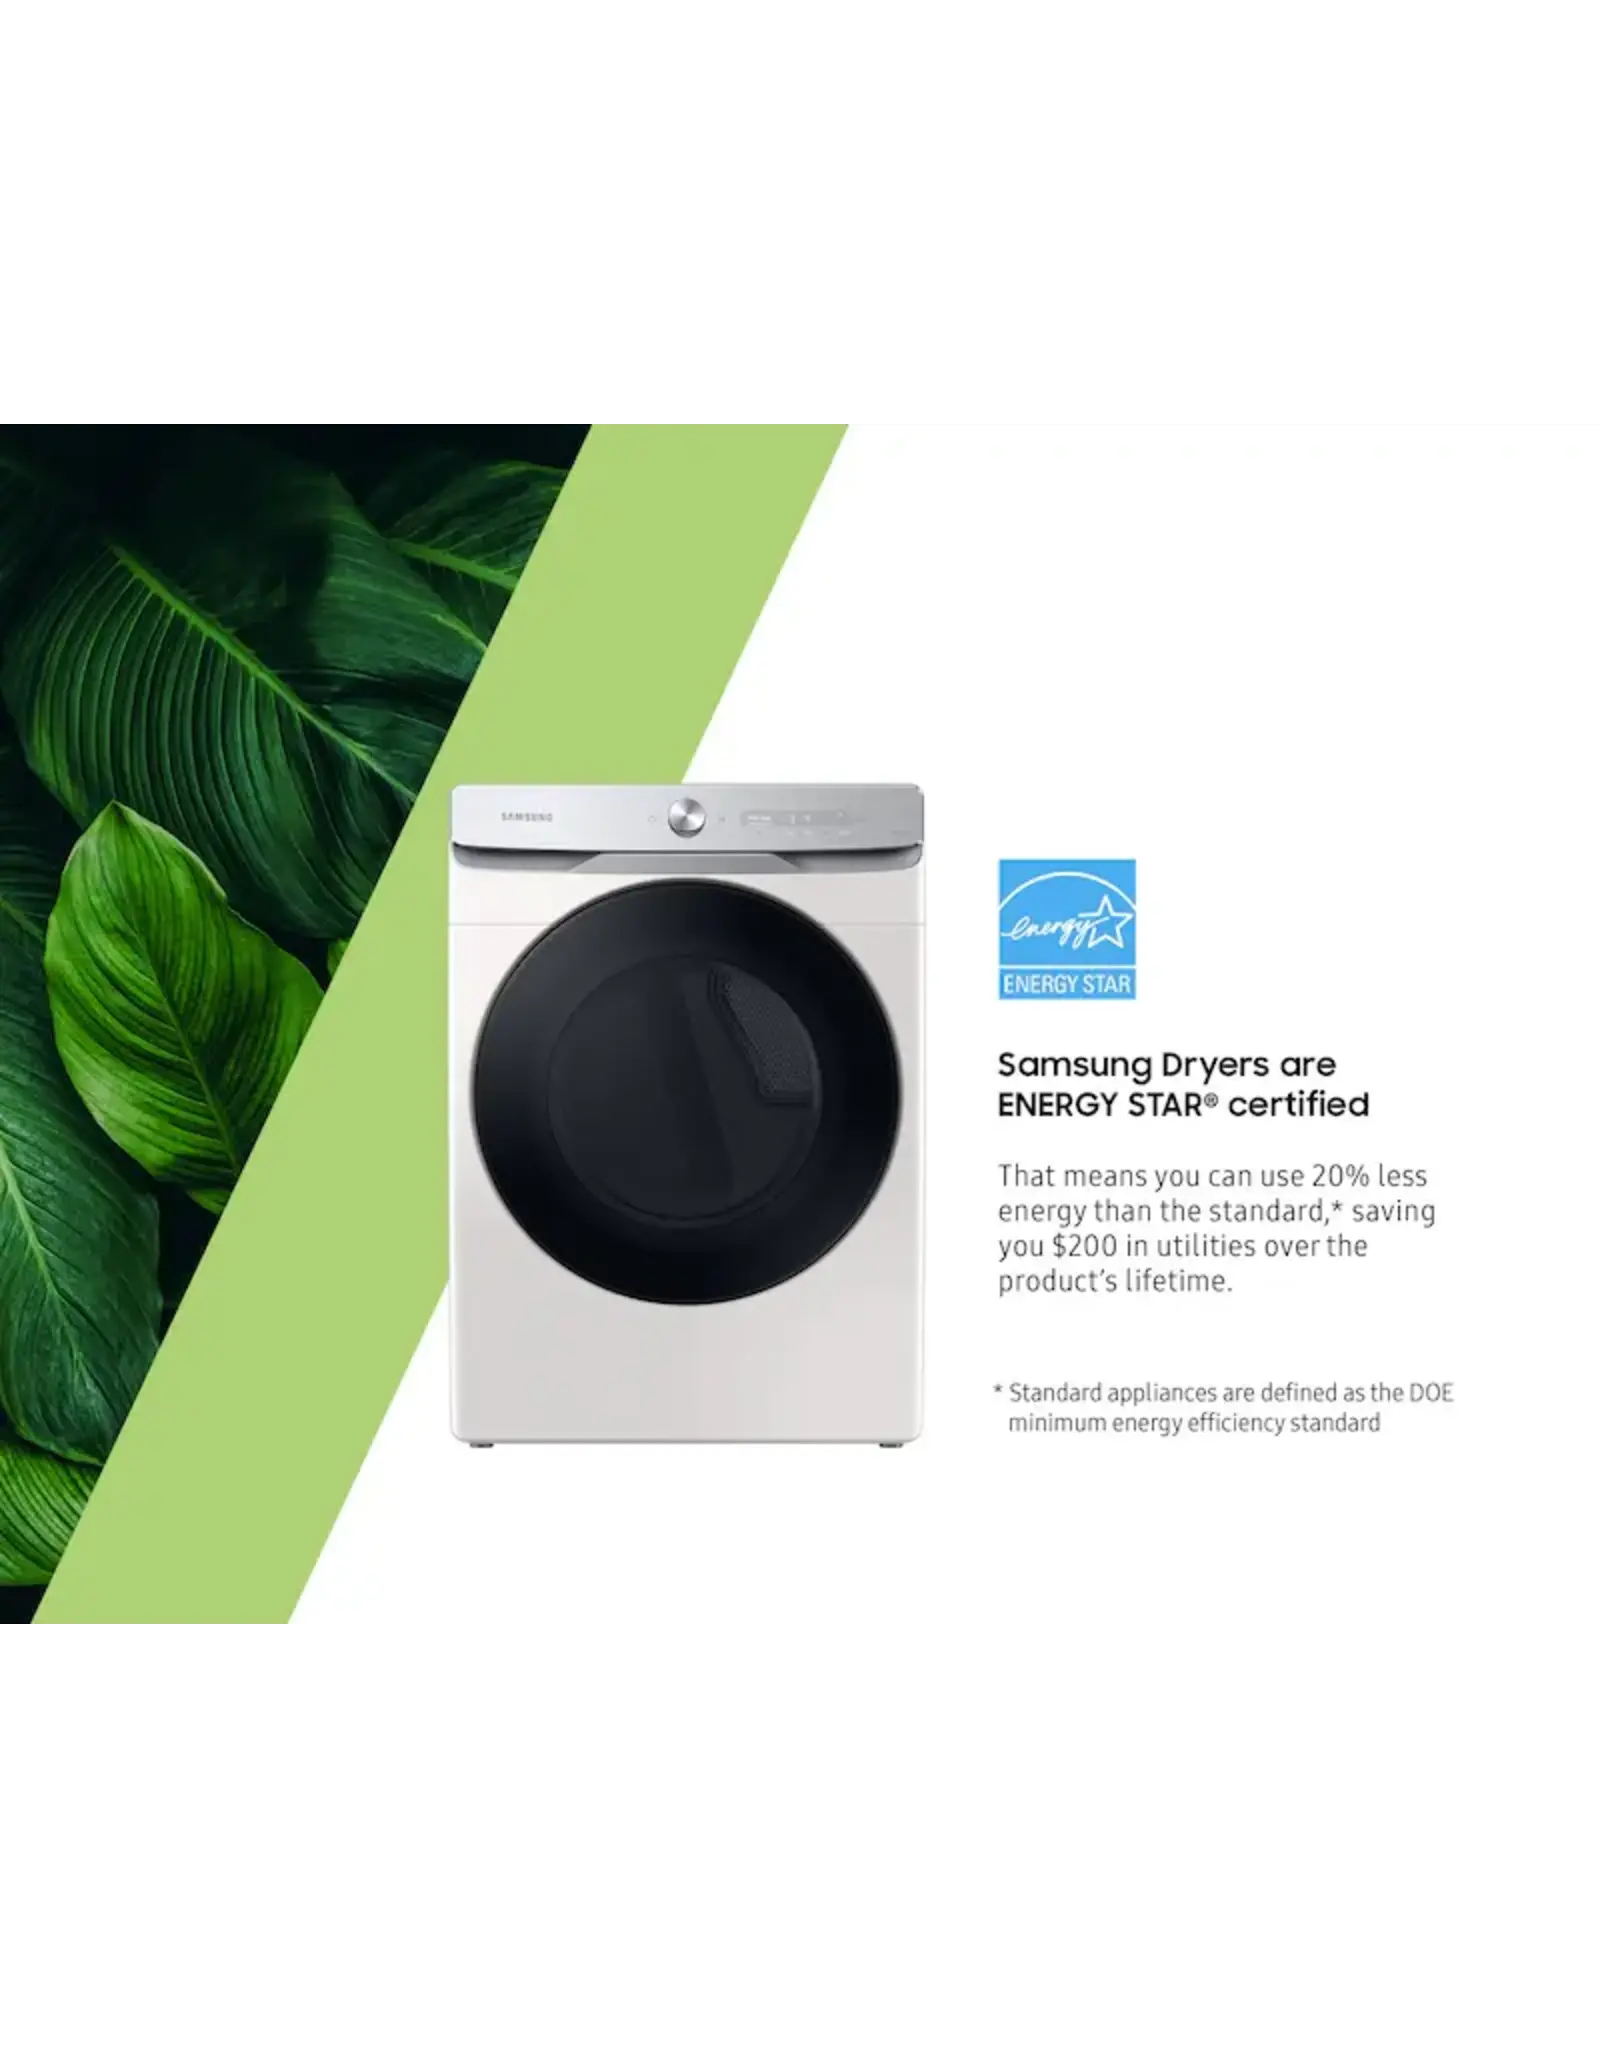 SAMSUNG DVE50A8600E 7.5 cu. ft. 240-Volt Ivory Electric Dryer with Smart Dial and Super Speed Dry, ENERGY STAR